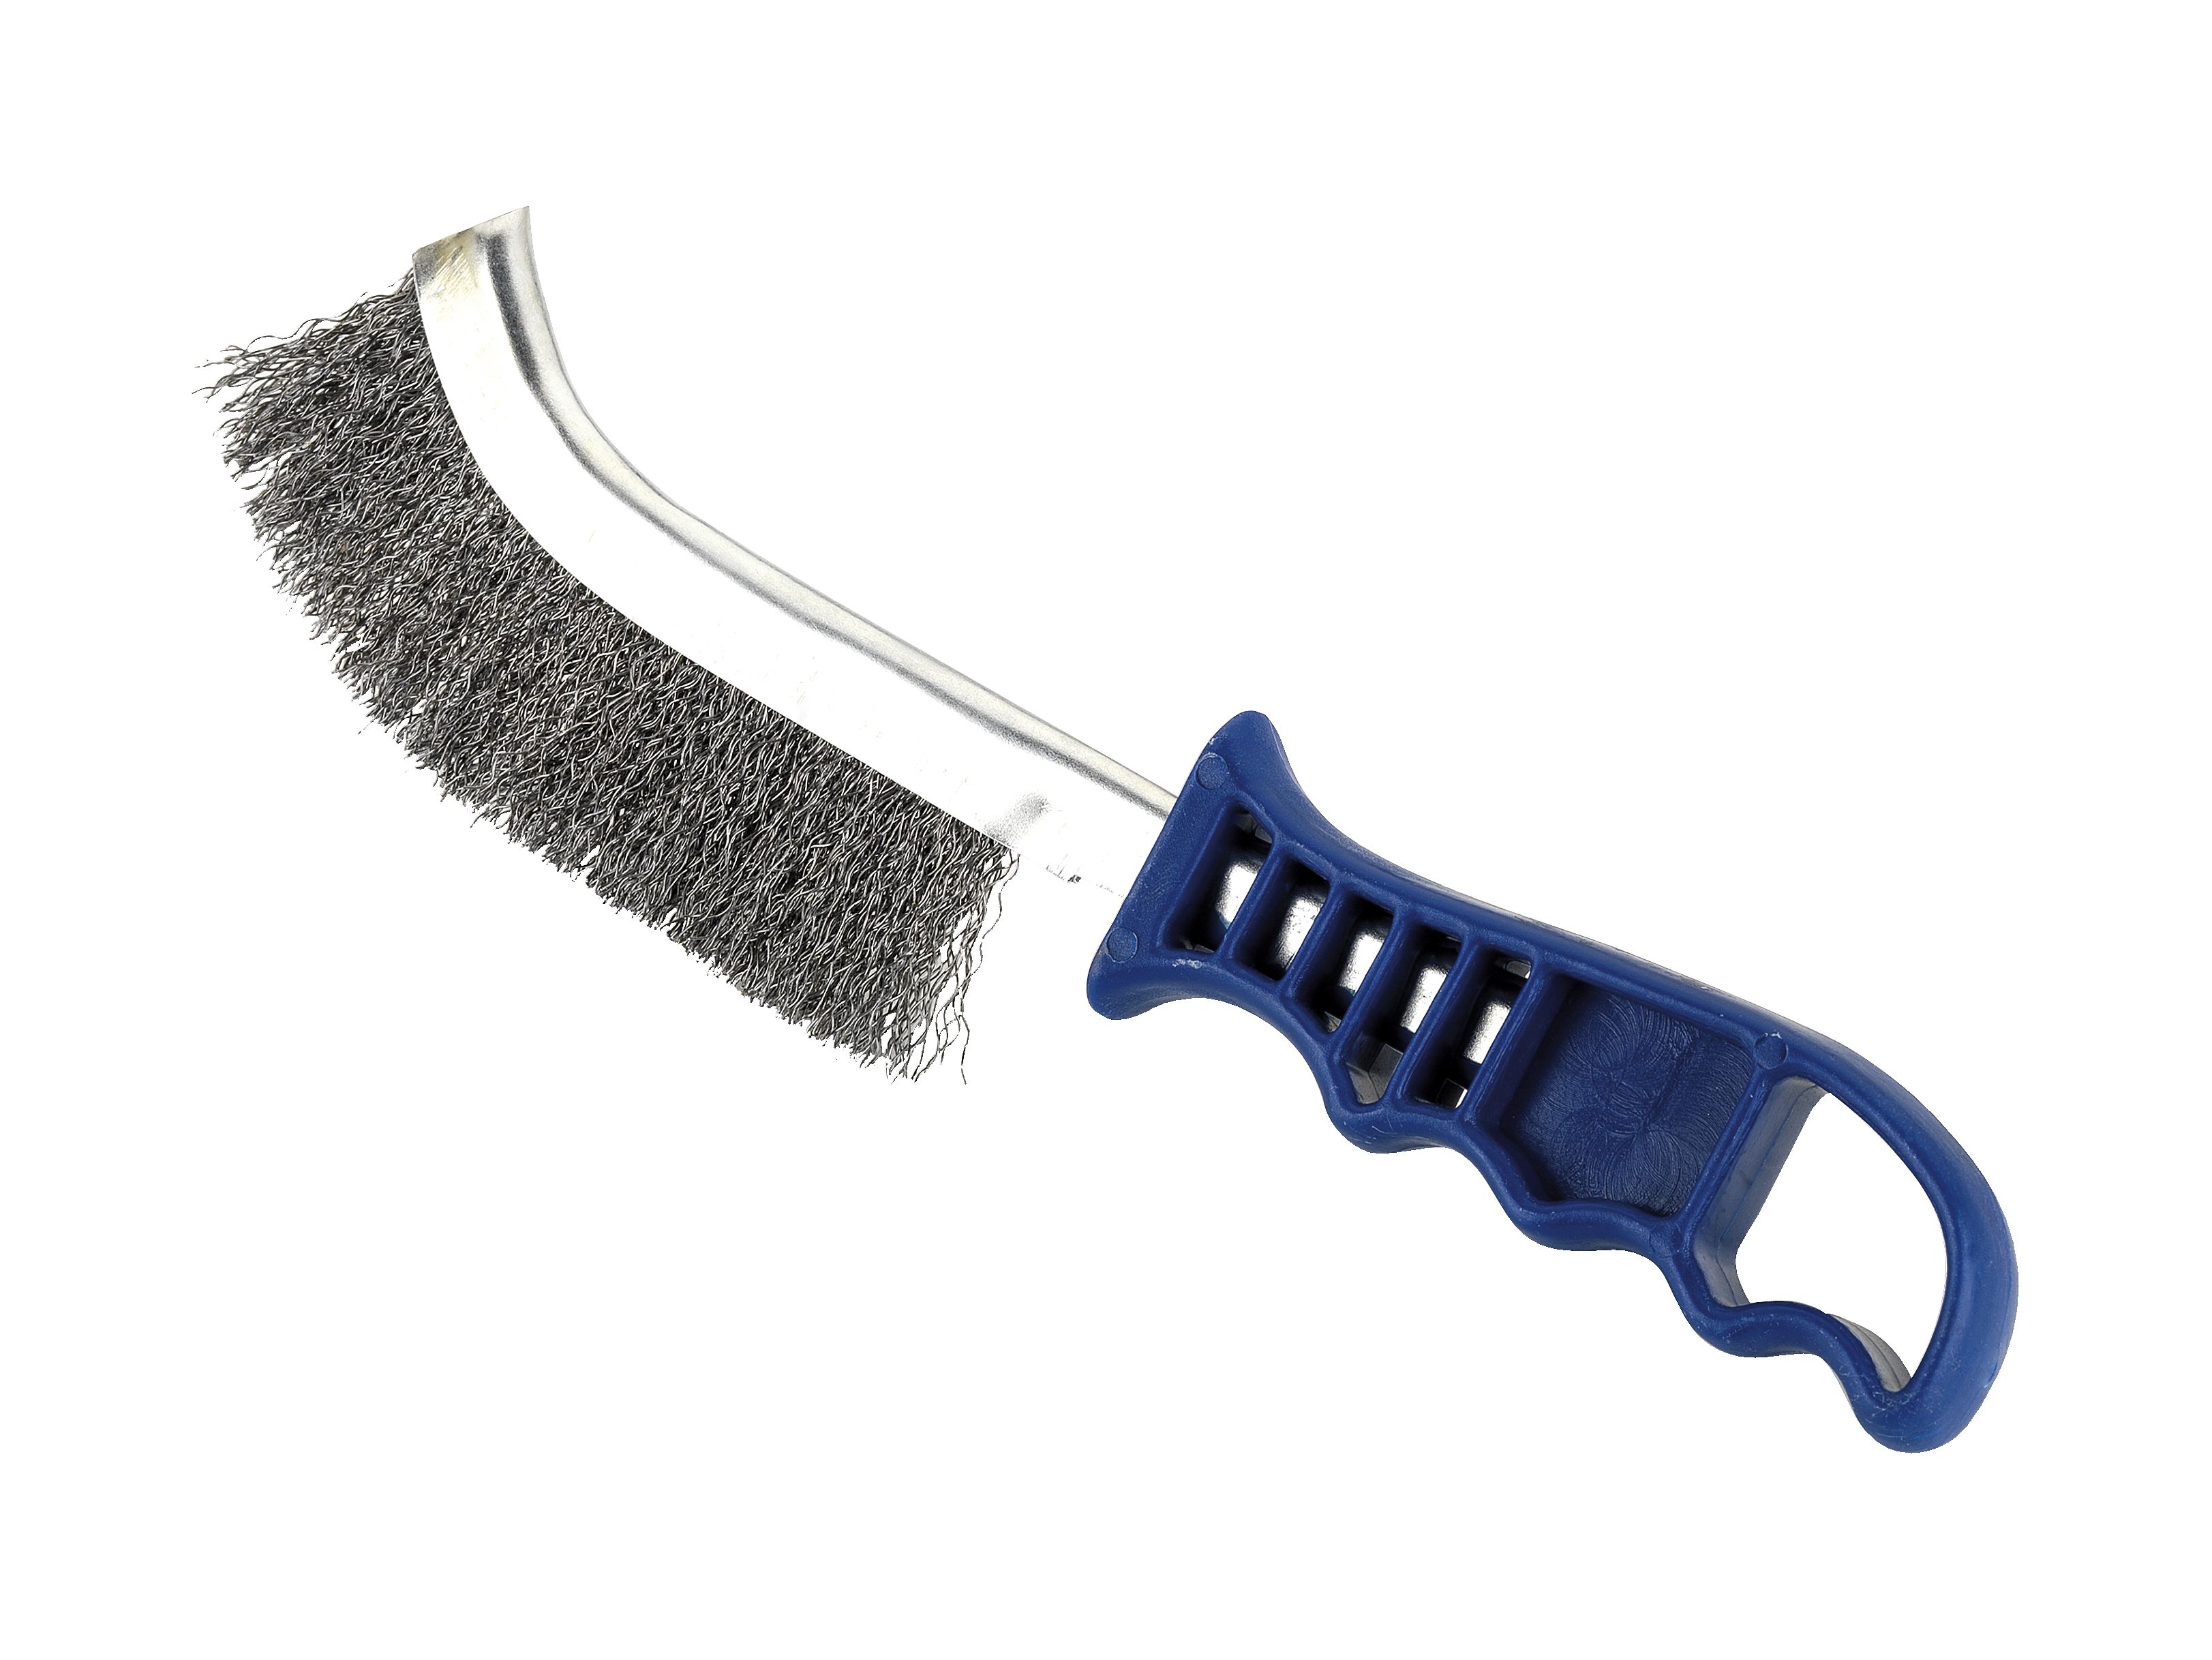 Crimped Stainless Steel Wire Brush With Plastic Handle ALYCO